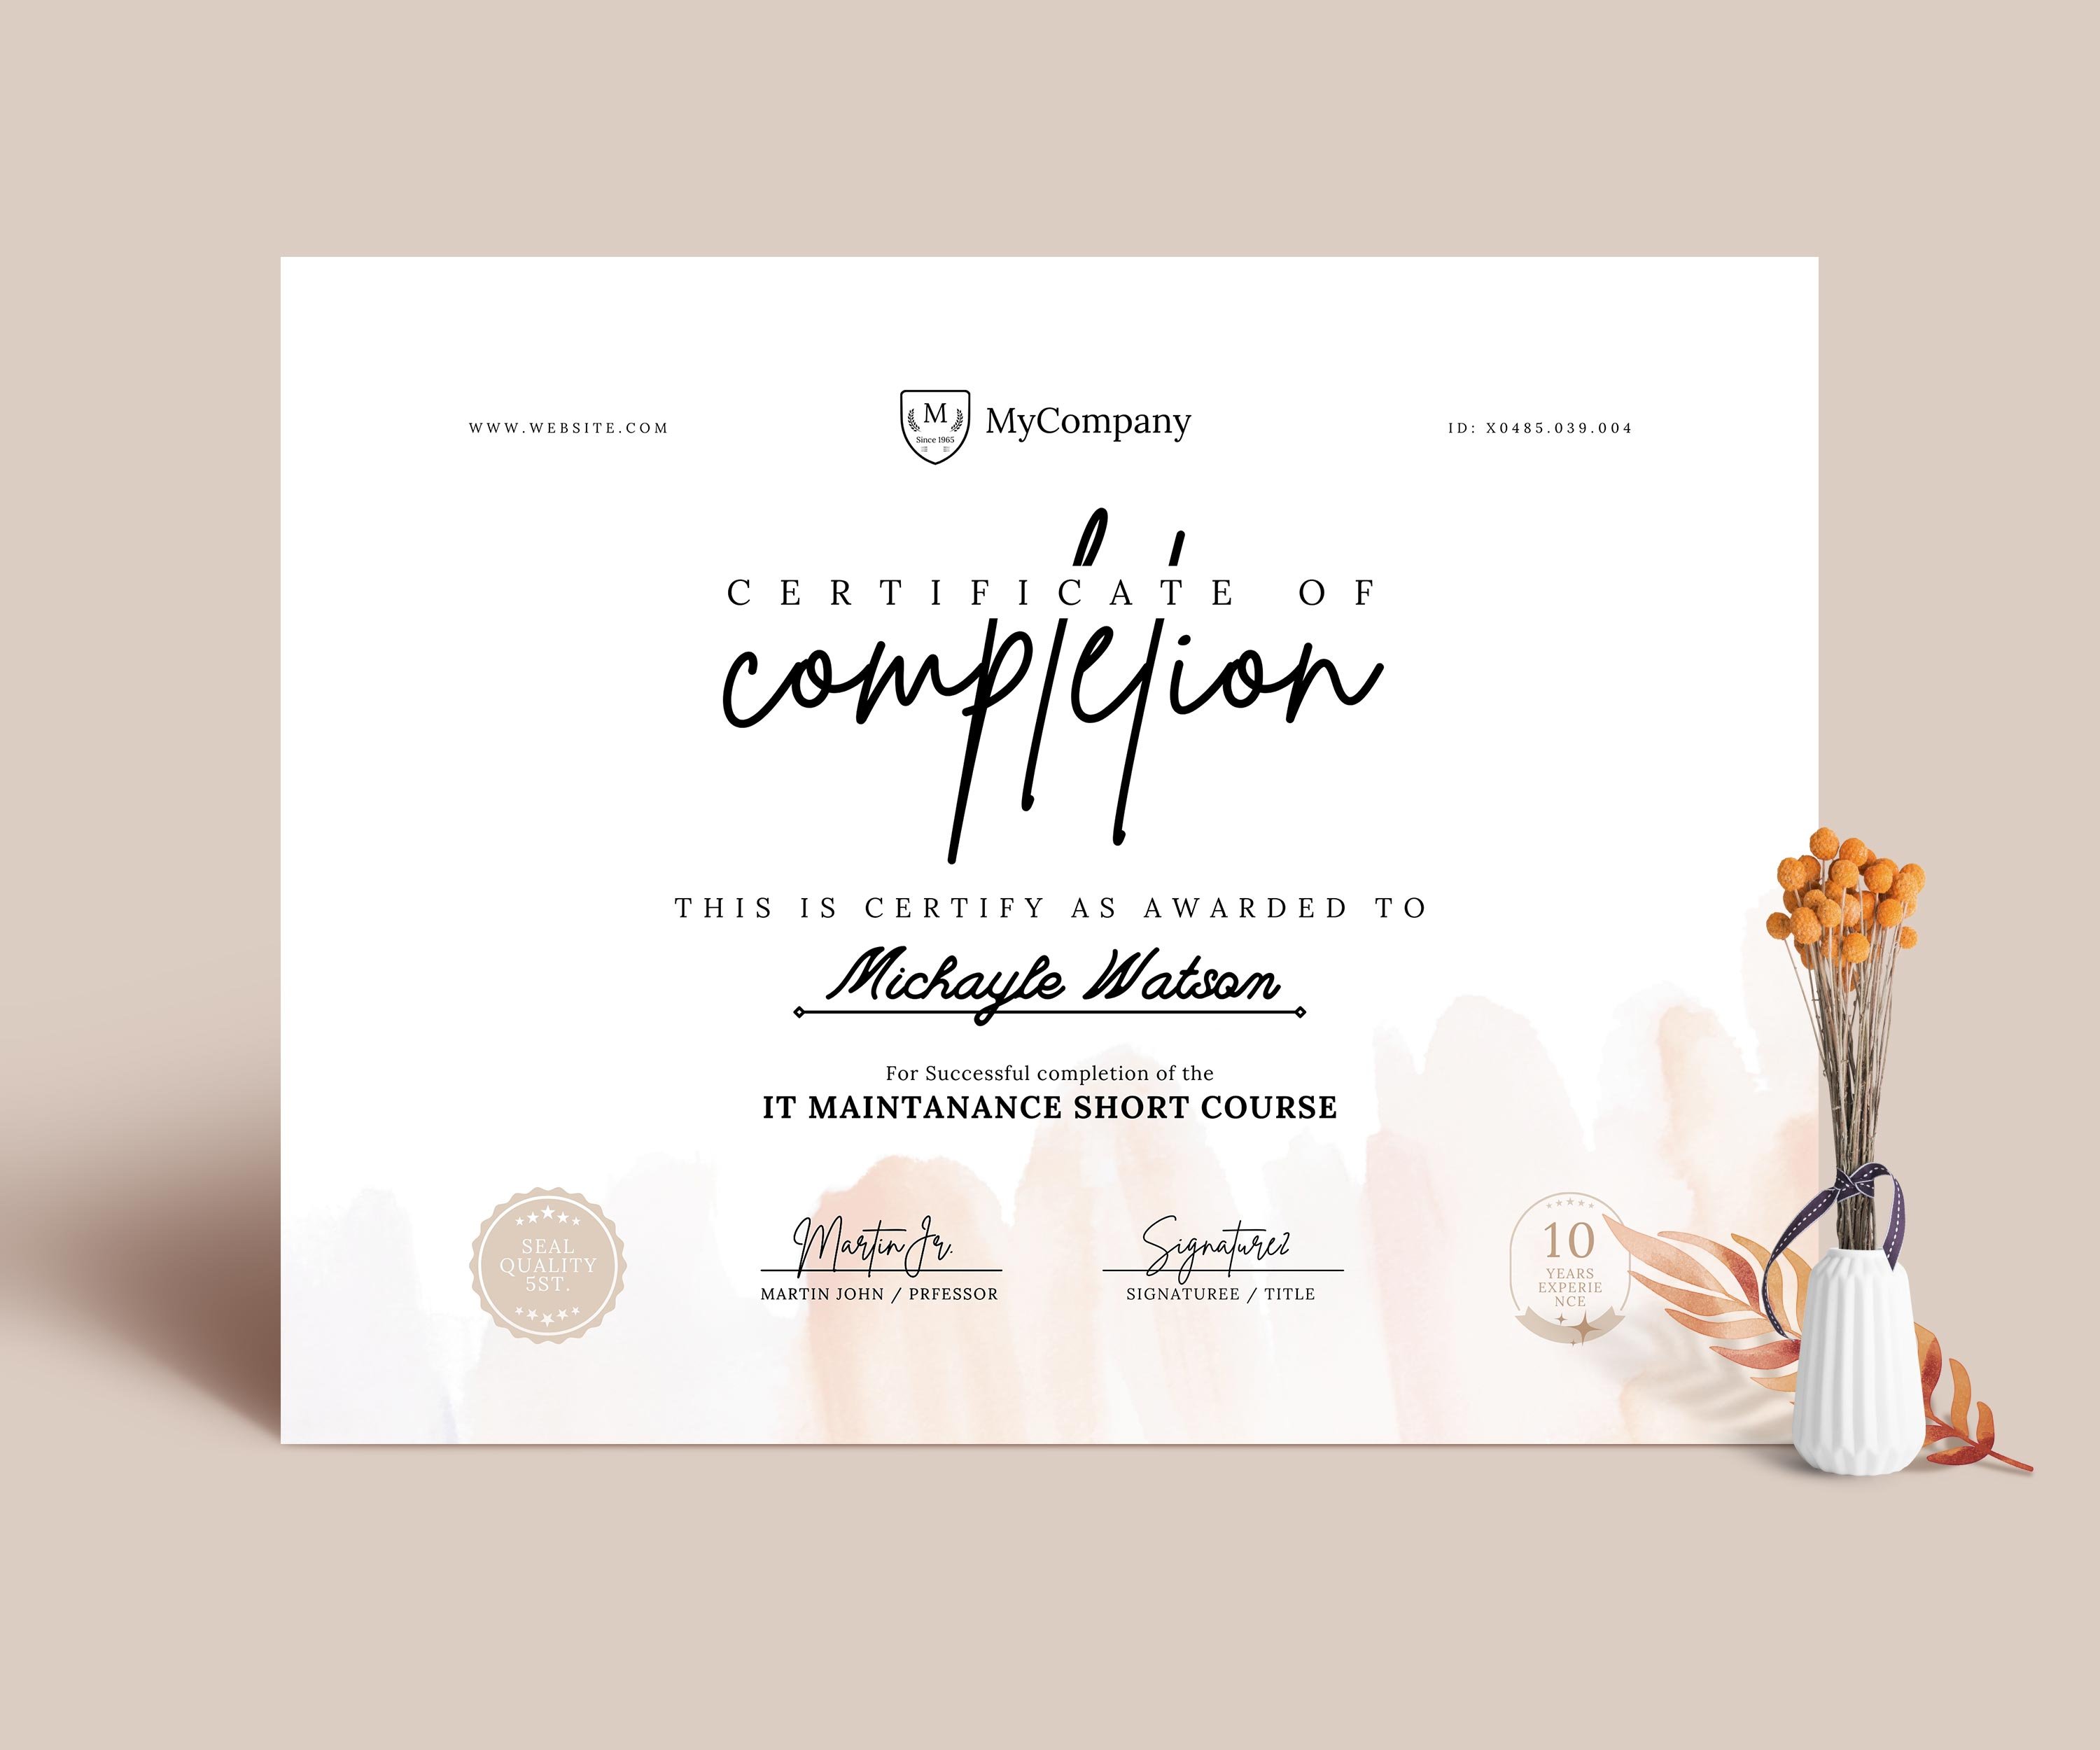 00 certificate of completion 408